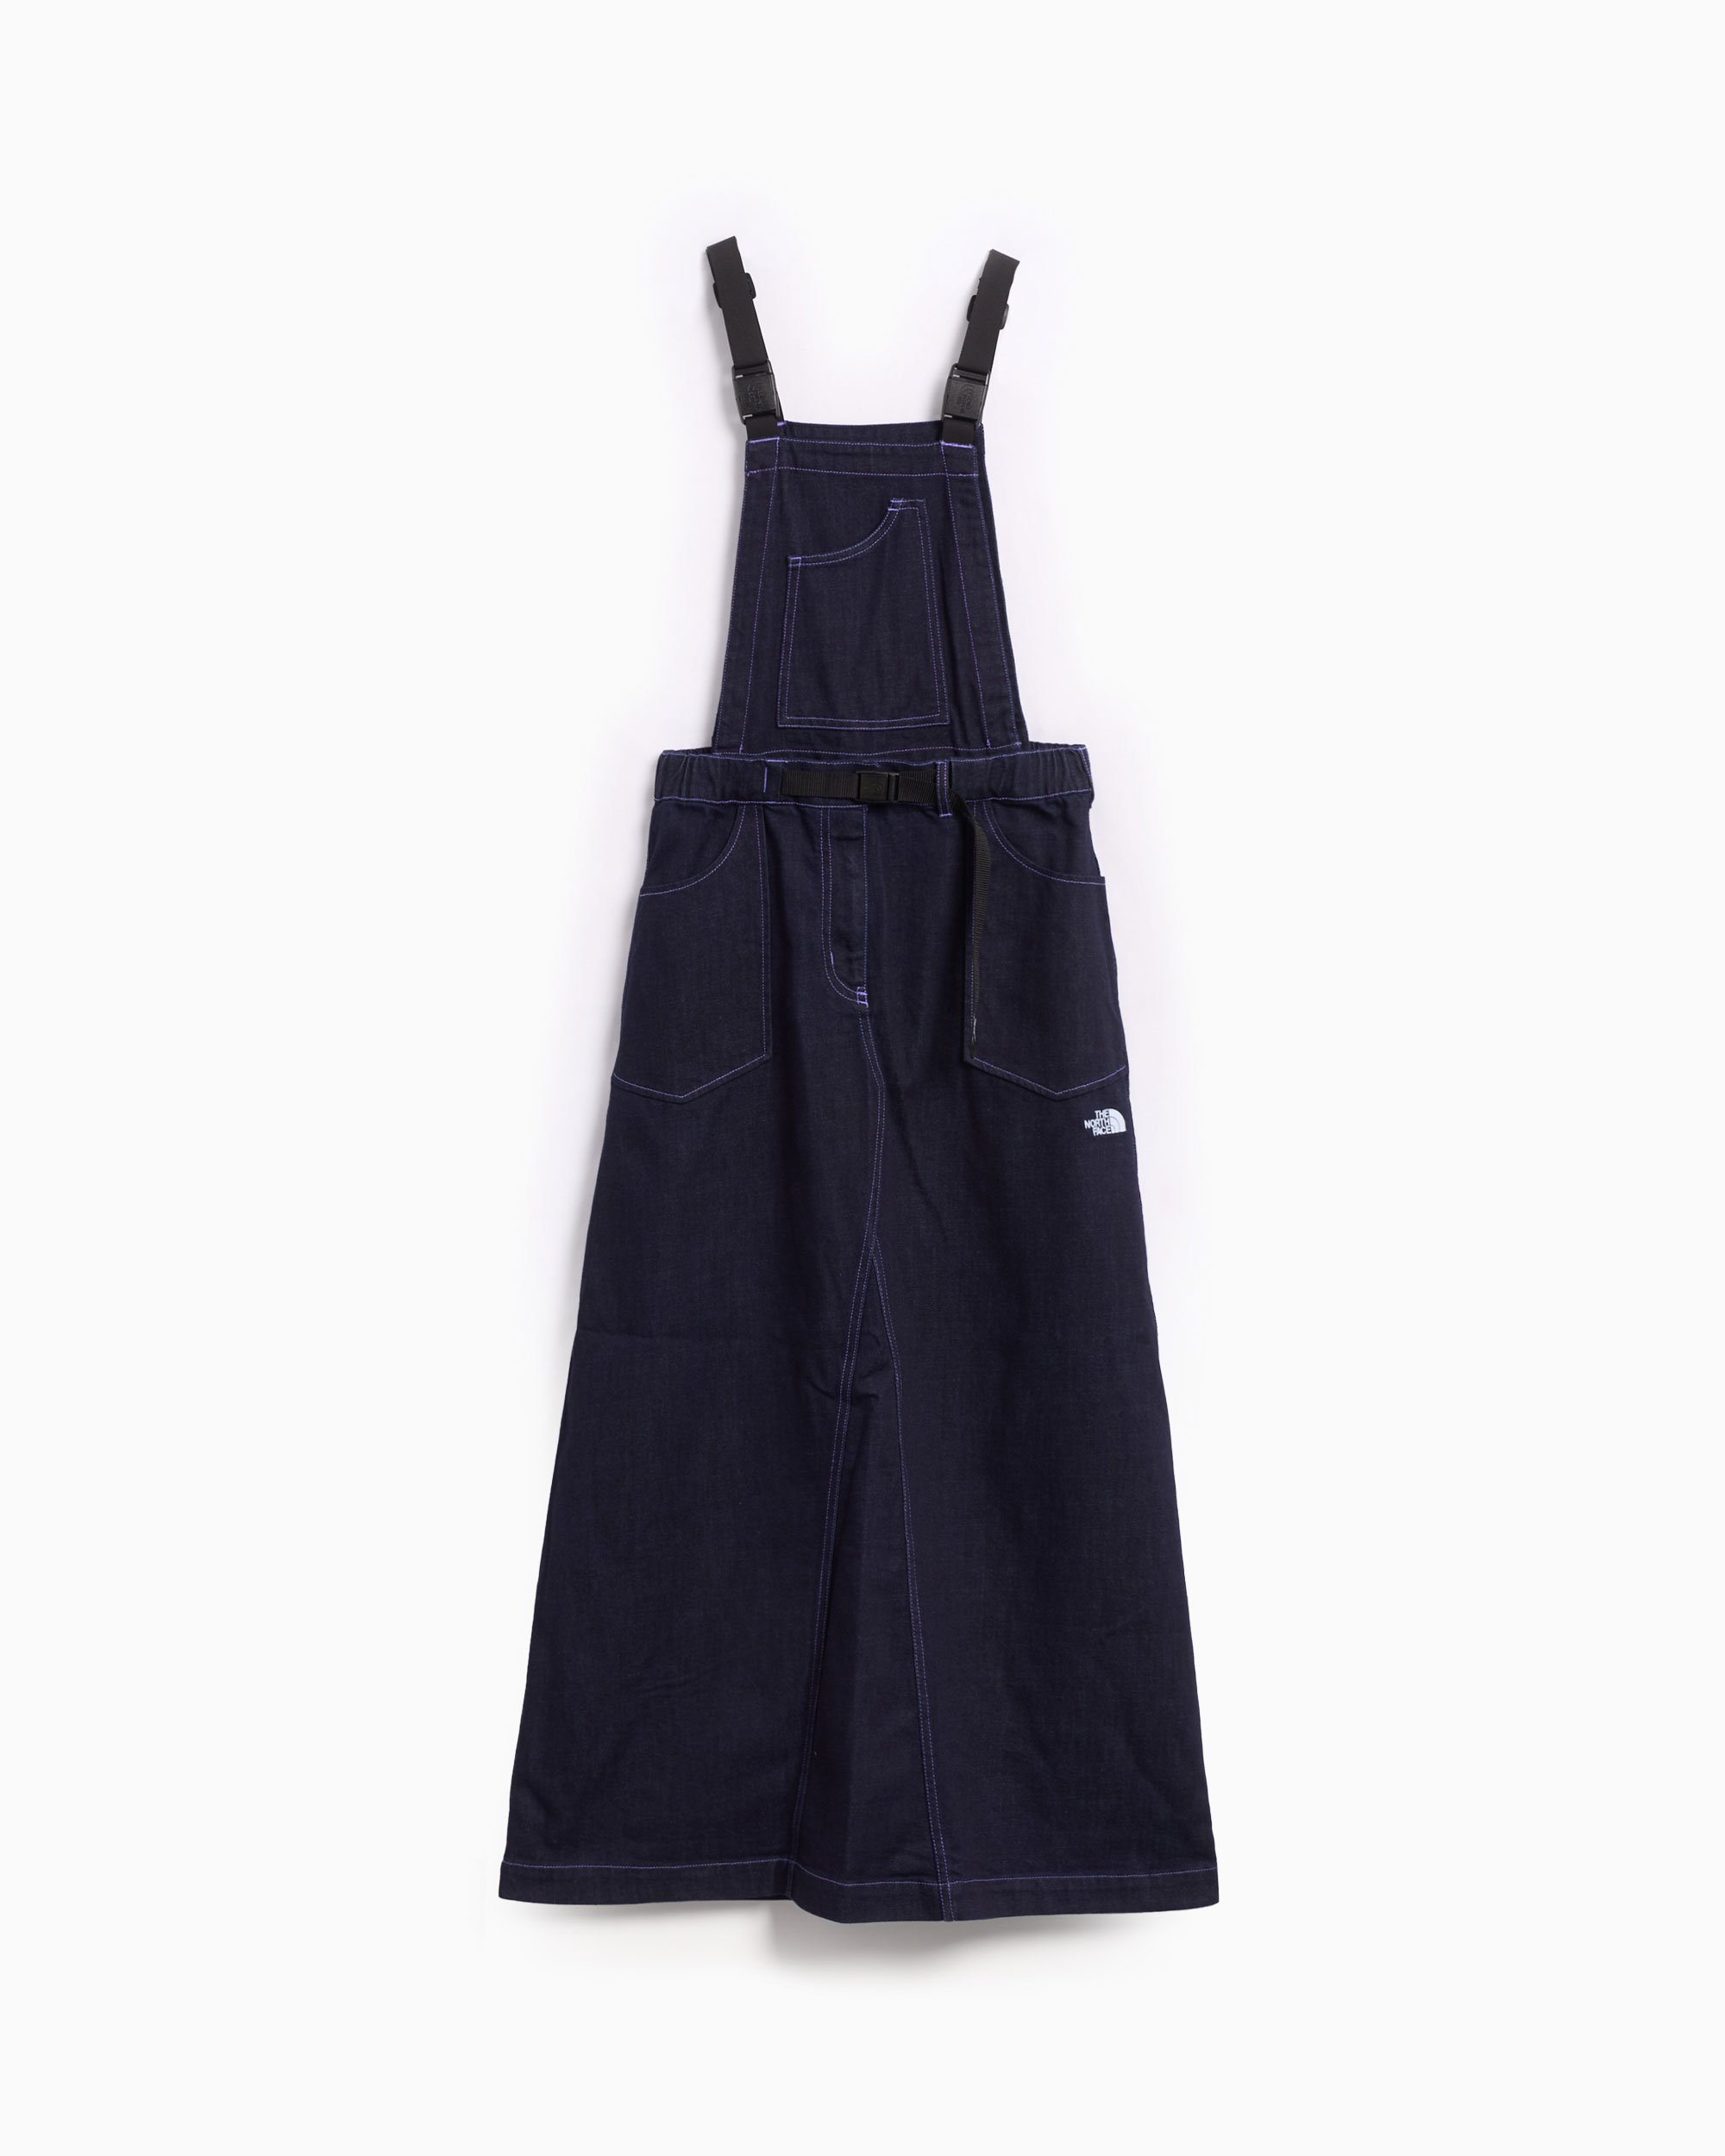 Overall Dresses